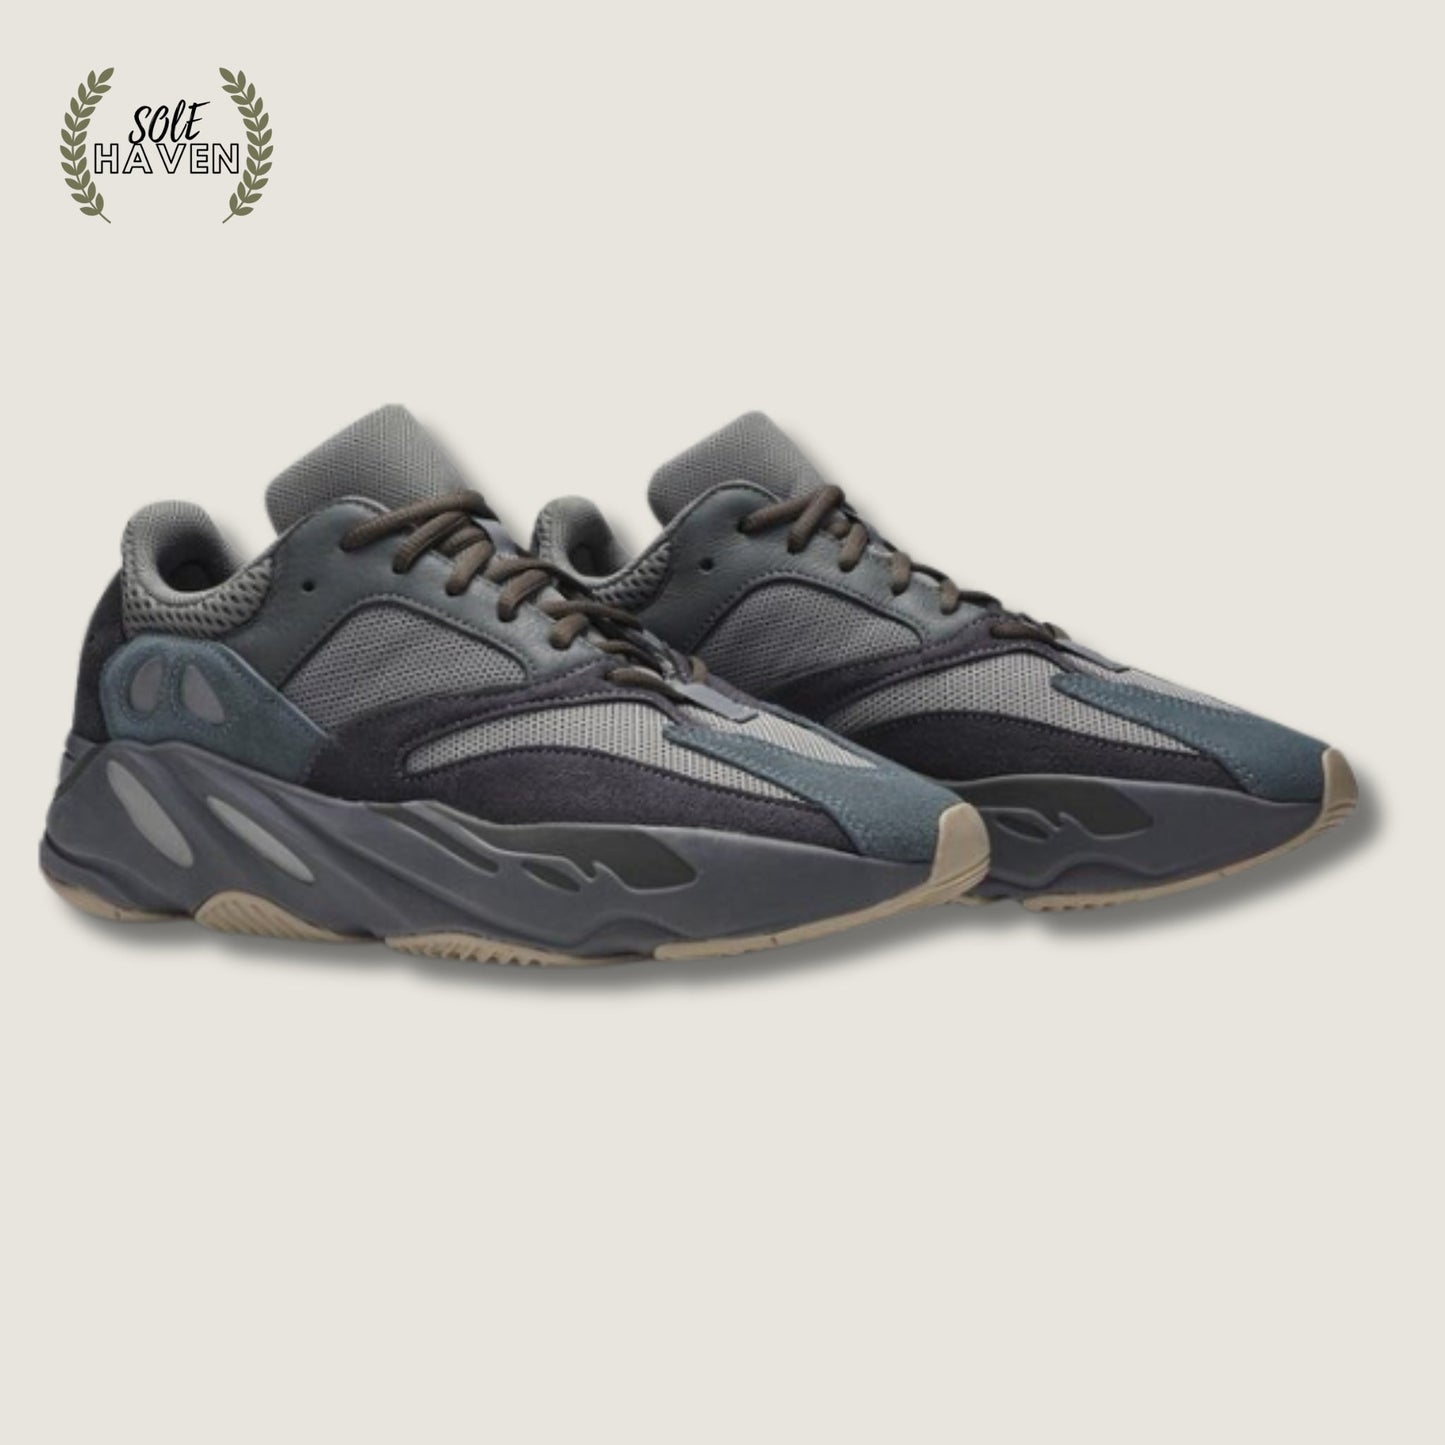 Yeezy Boost 700 'Teal Blue' - Sole HavenShoesAdidas